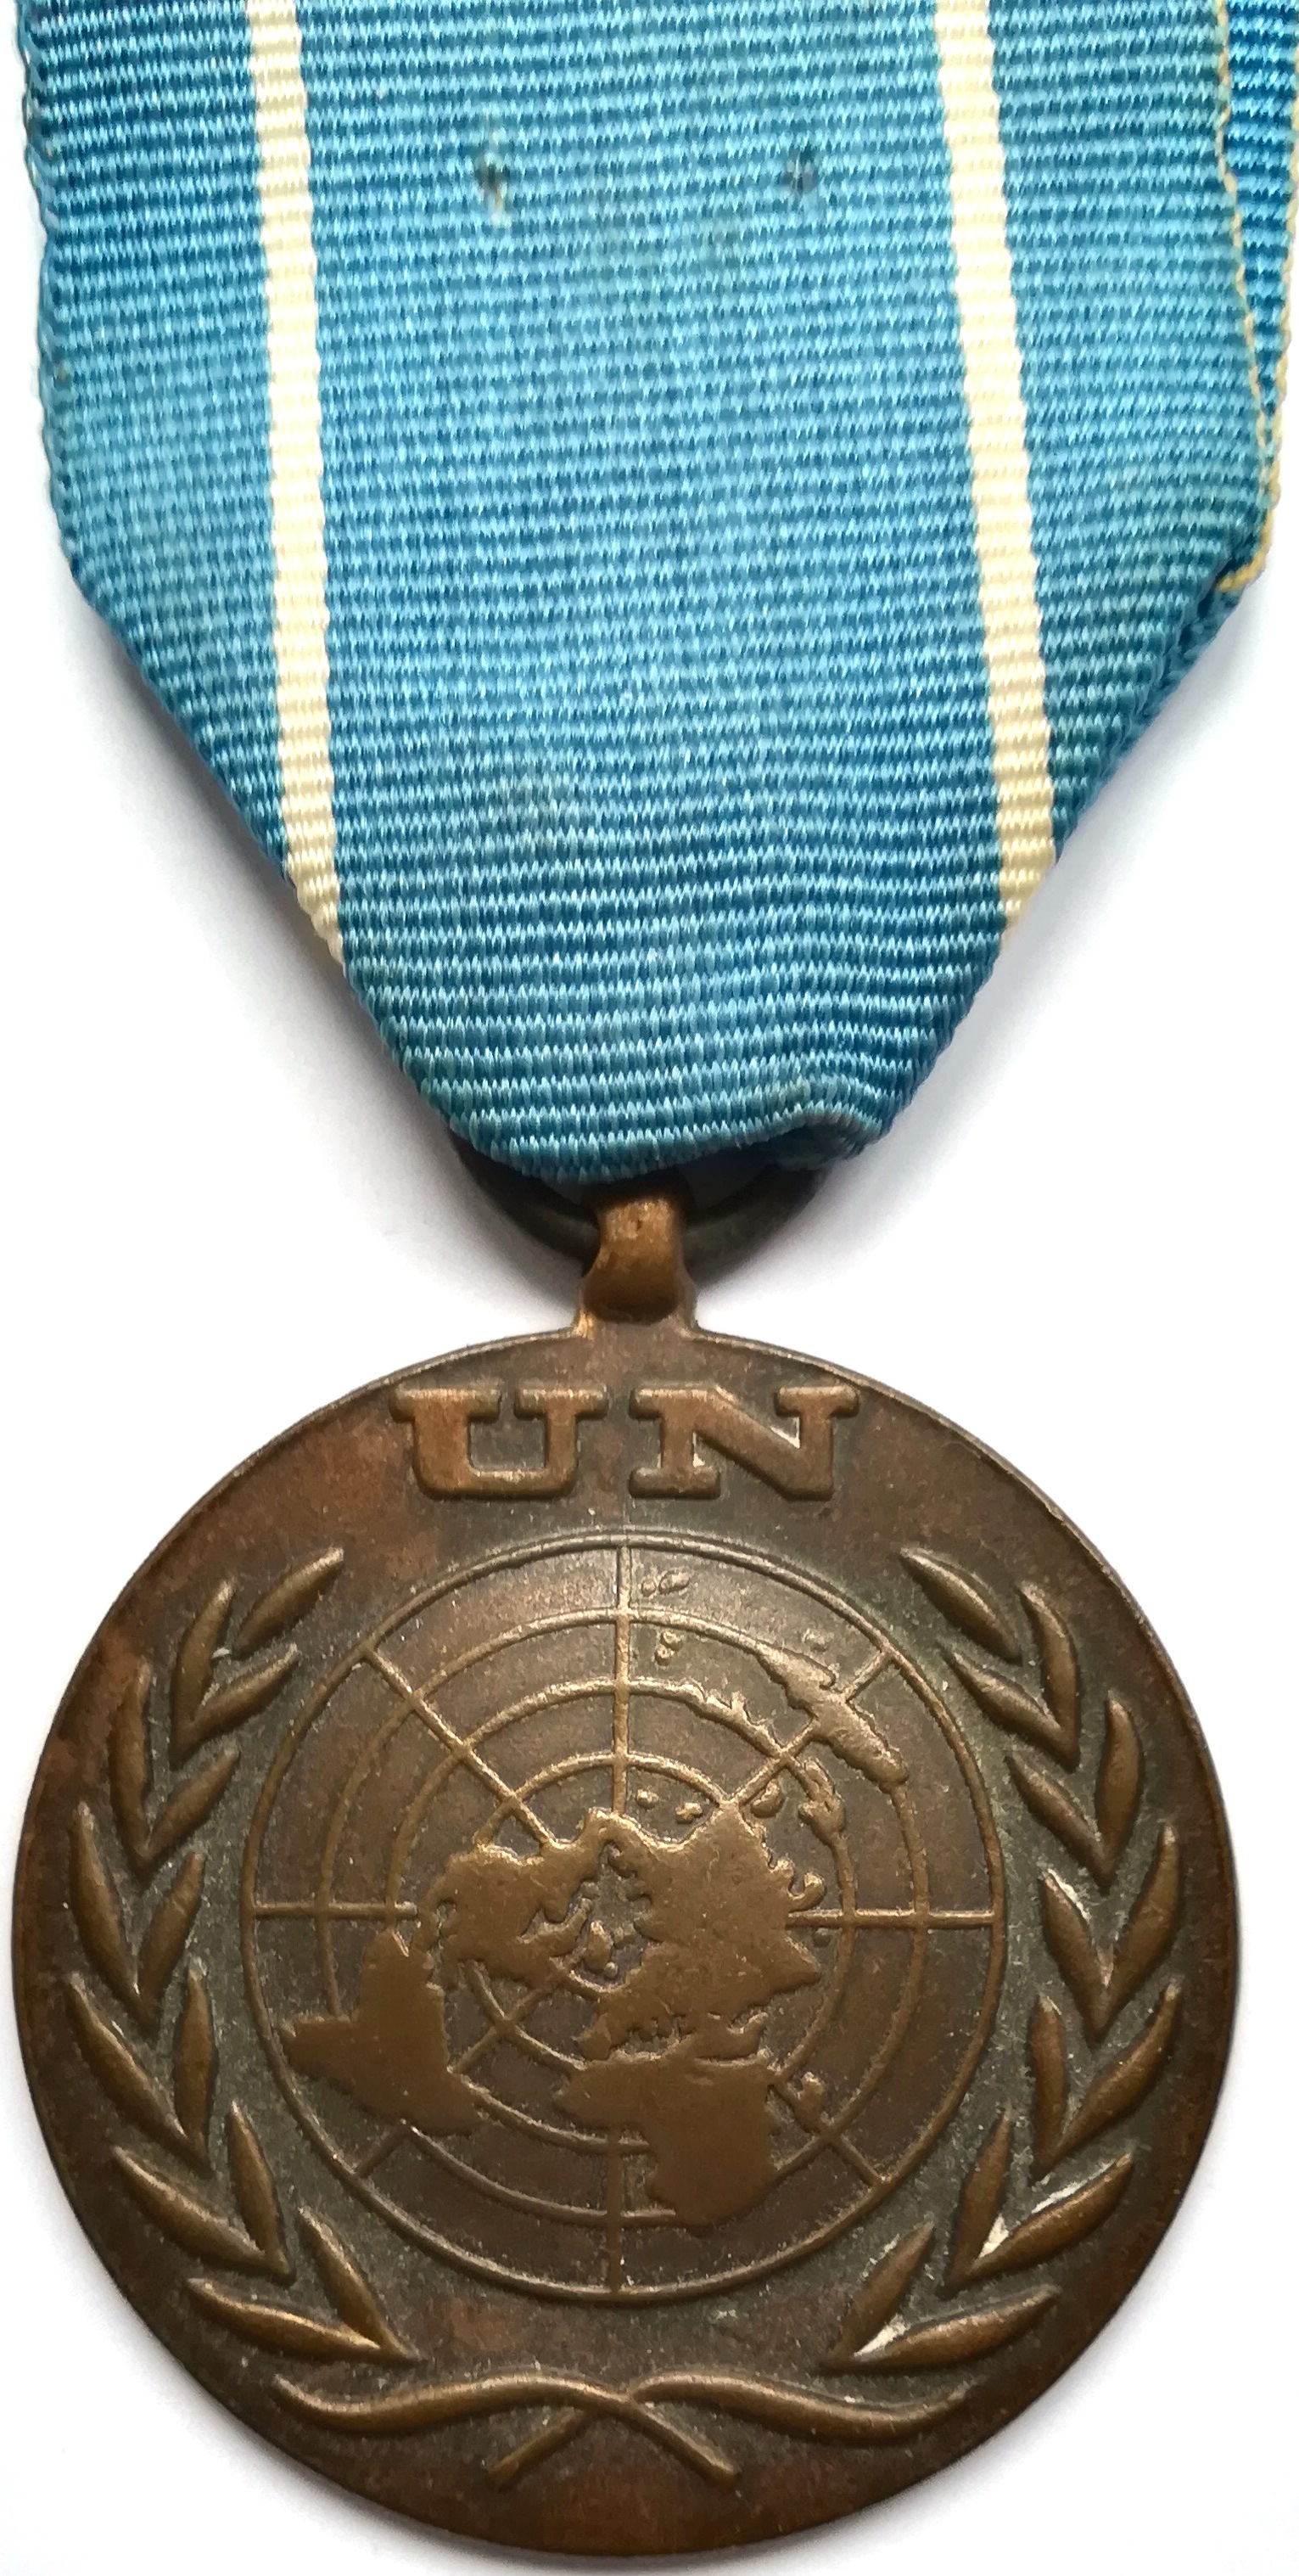 United Nations Medals